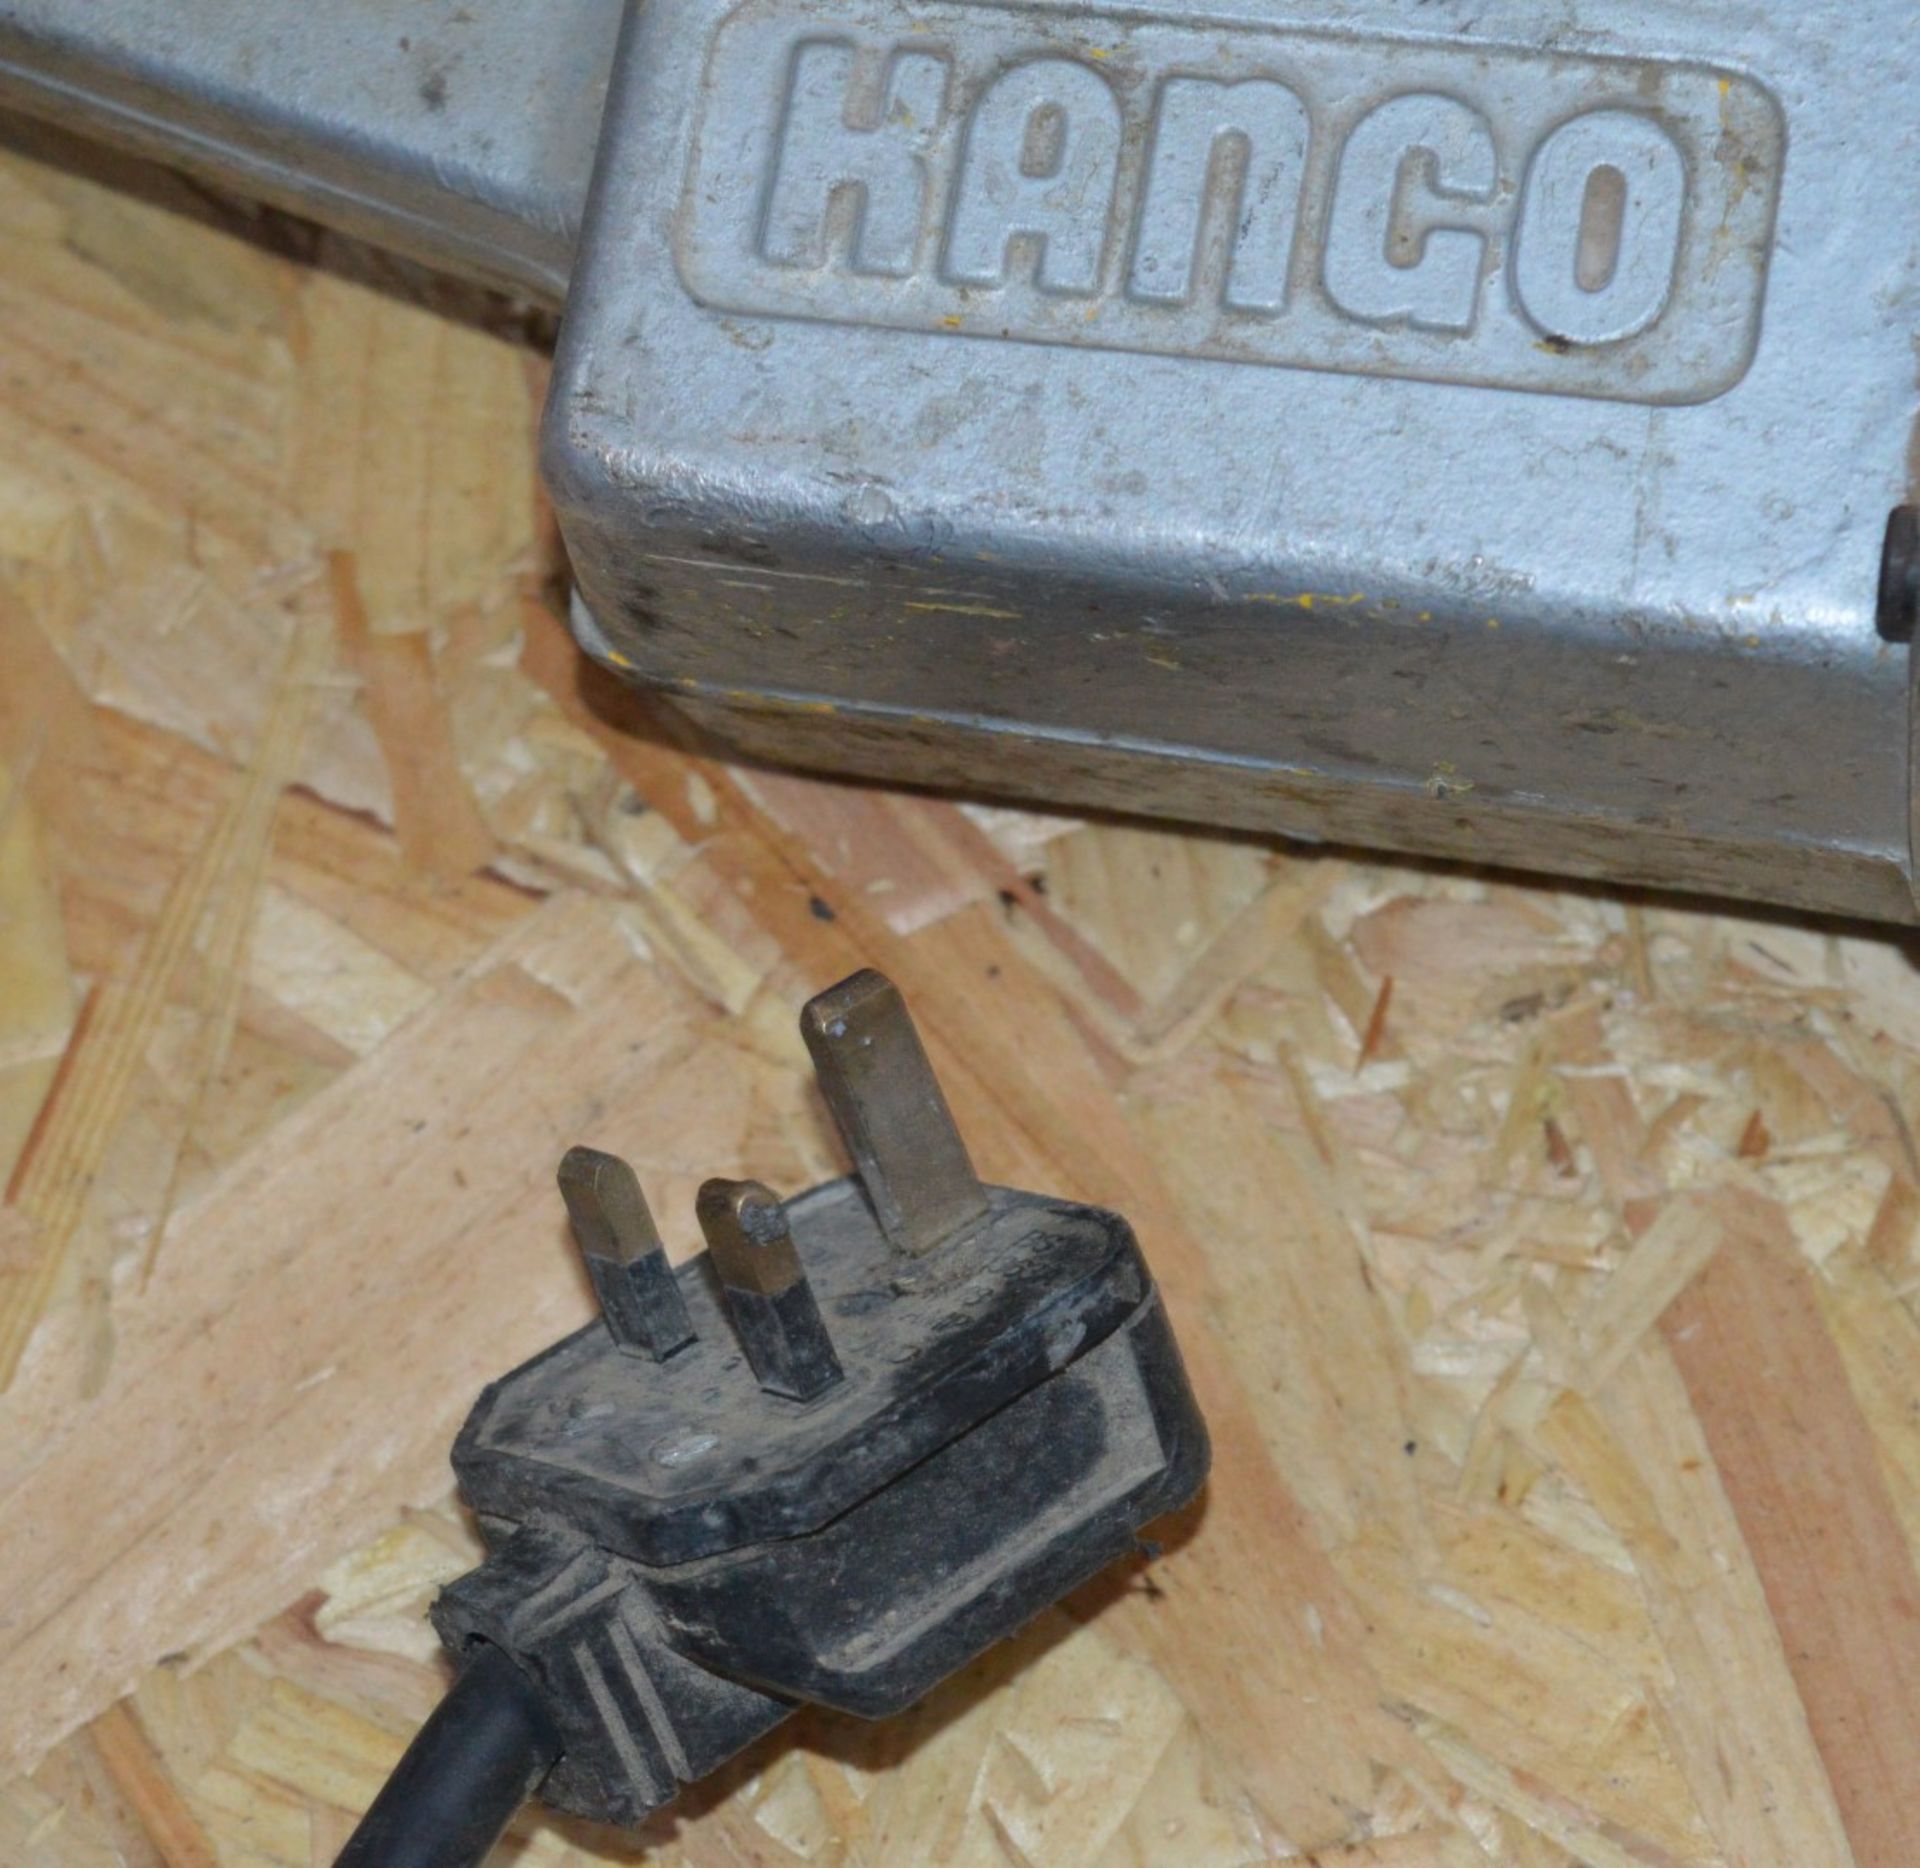 1 x Kango 950 Concrete Breaker / Hammer Drill With Two Drill Bits - 240v UK Plug - CL011 - Ref JP767 - Image 4 of 9